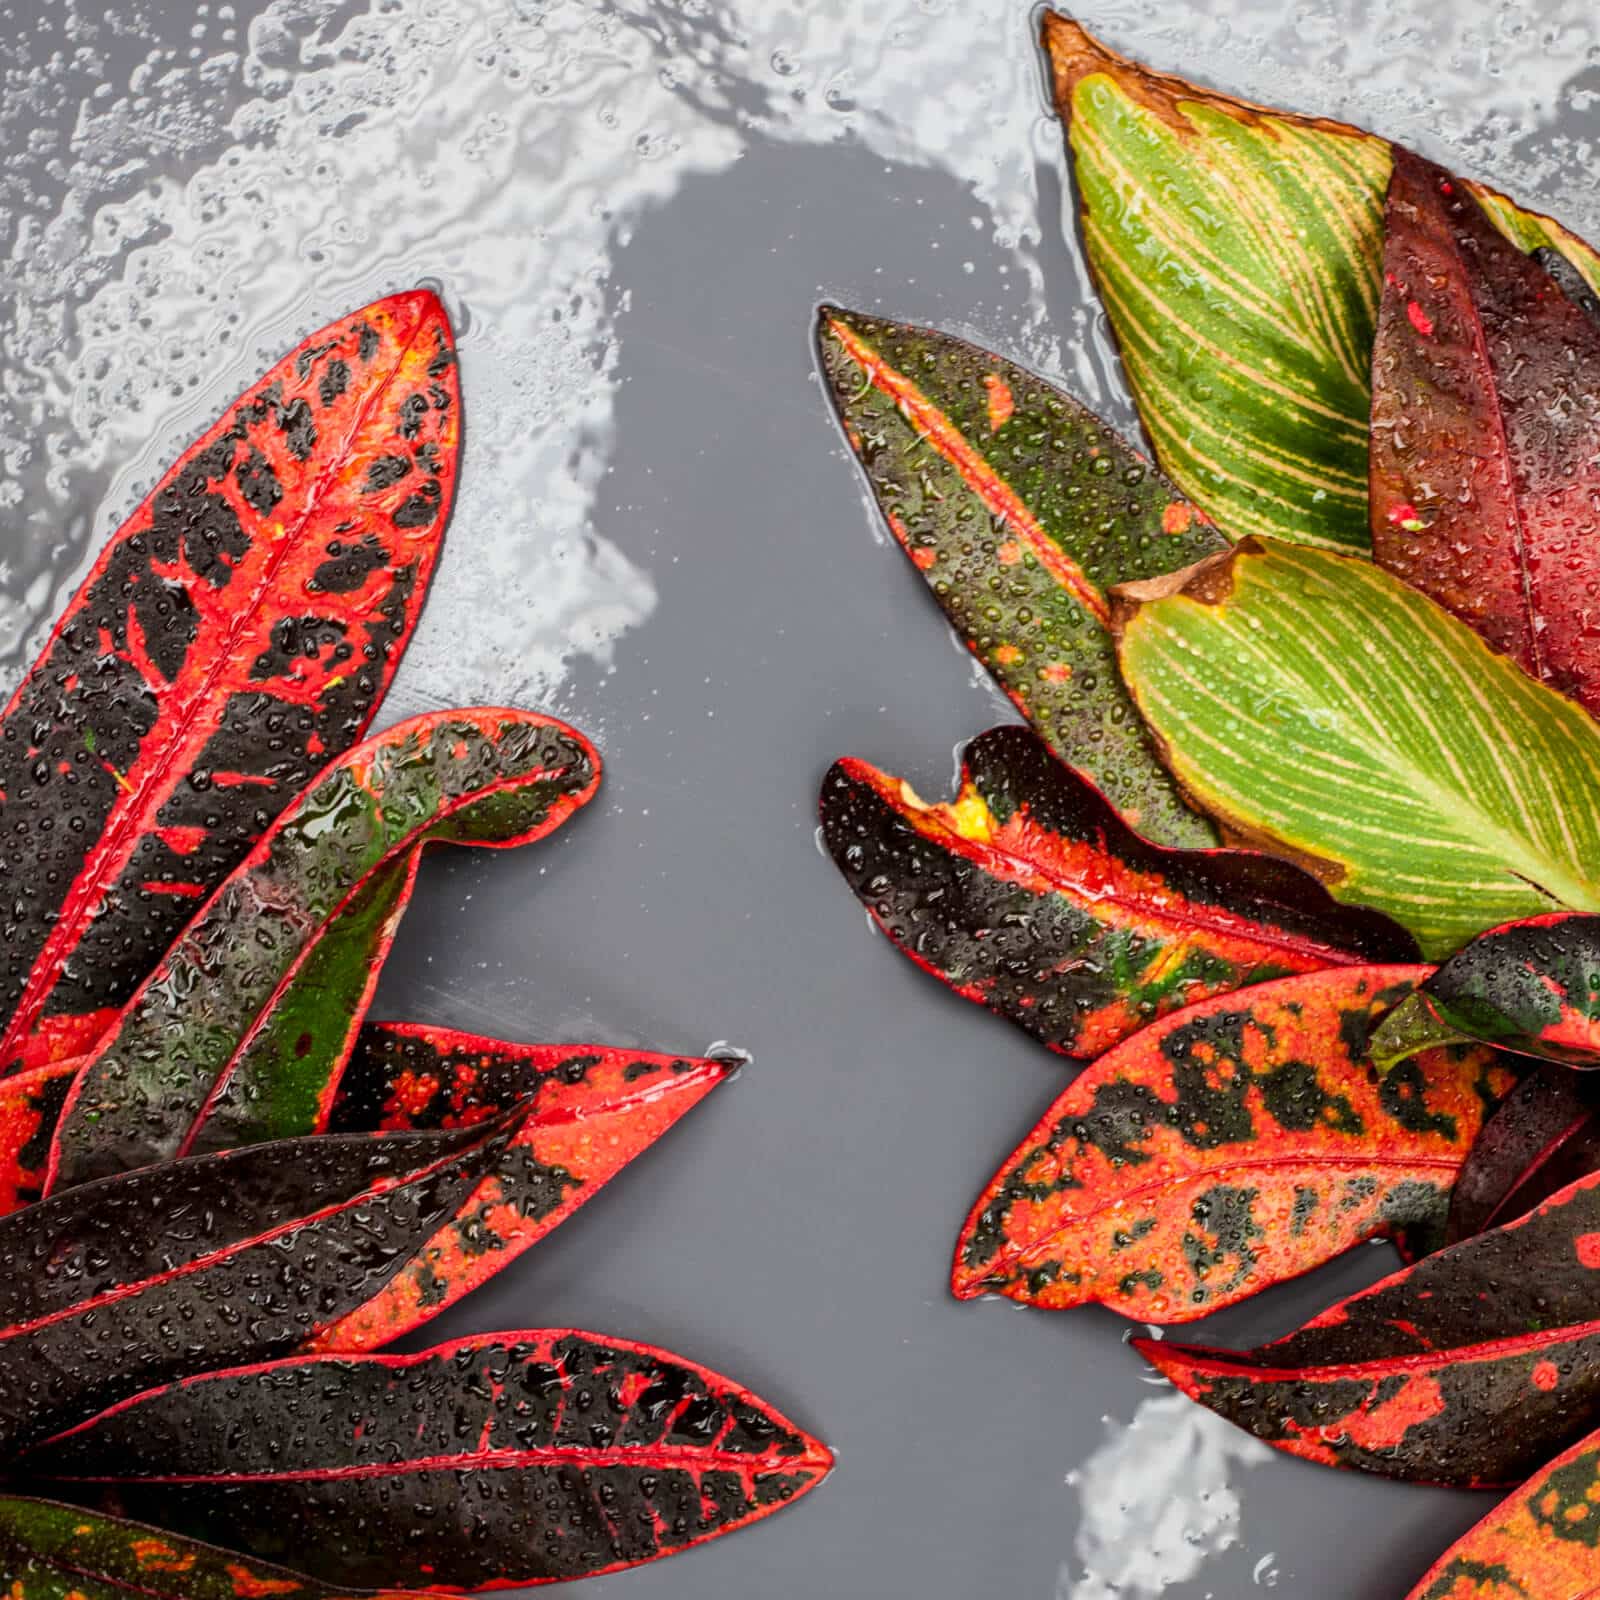 Vibrant red and green tropical plant leaves with water droplets on a grey background.